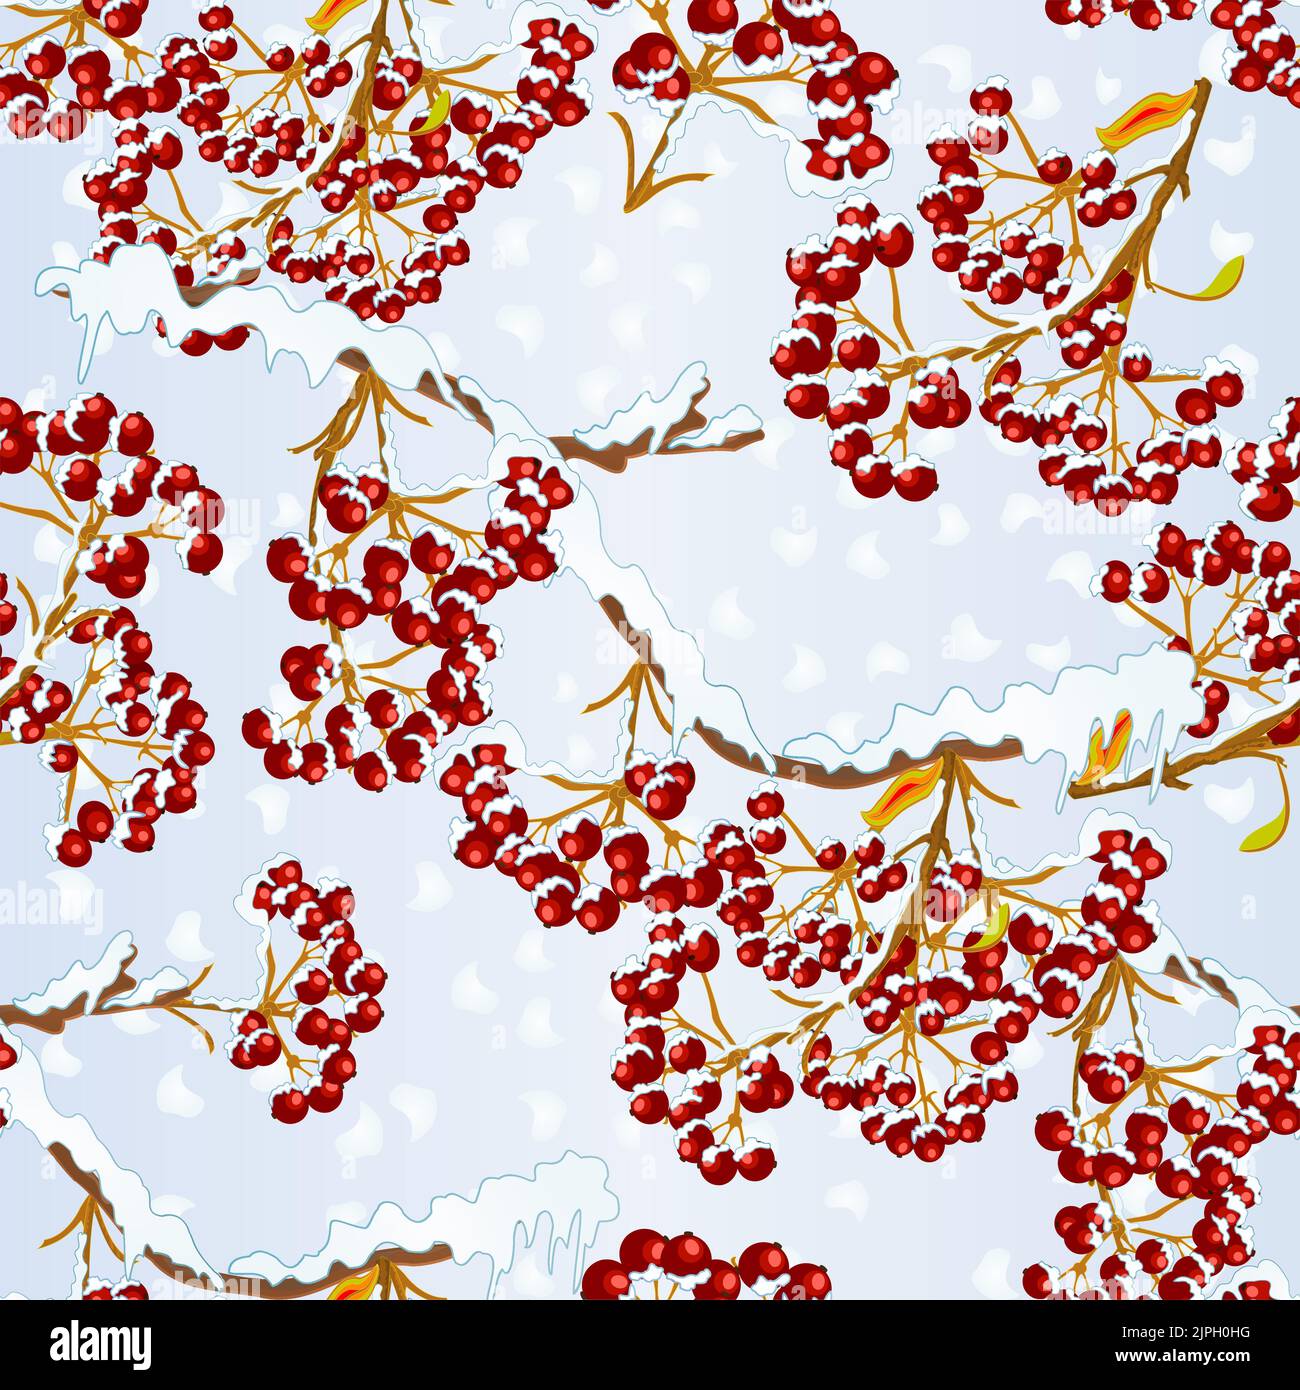 Seamless texture rowan red berries on branch covered with snow seasonal sale advertising element vintage vector illustration editable hand draw Stock Vector